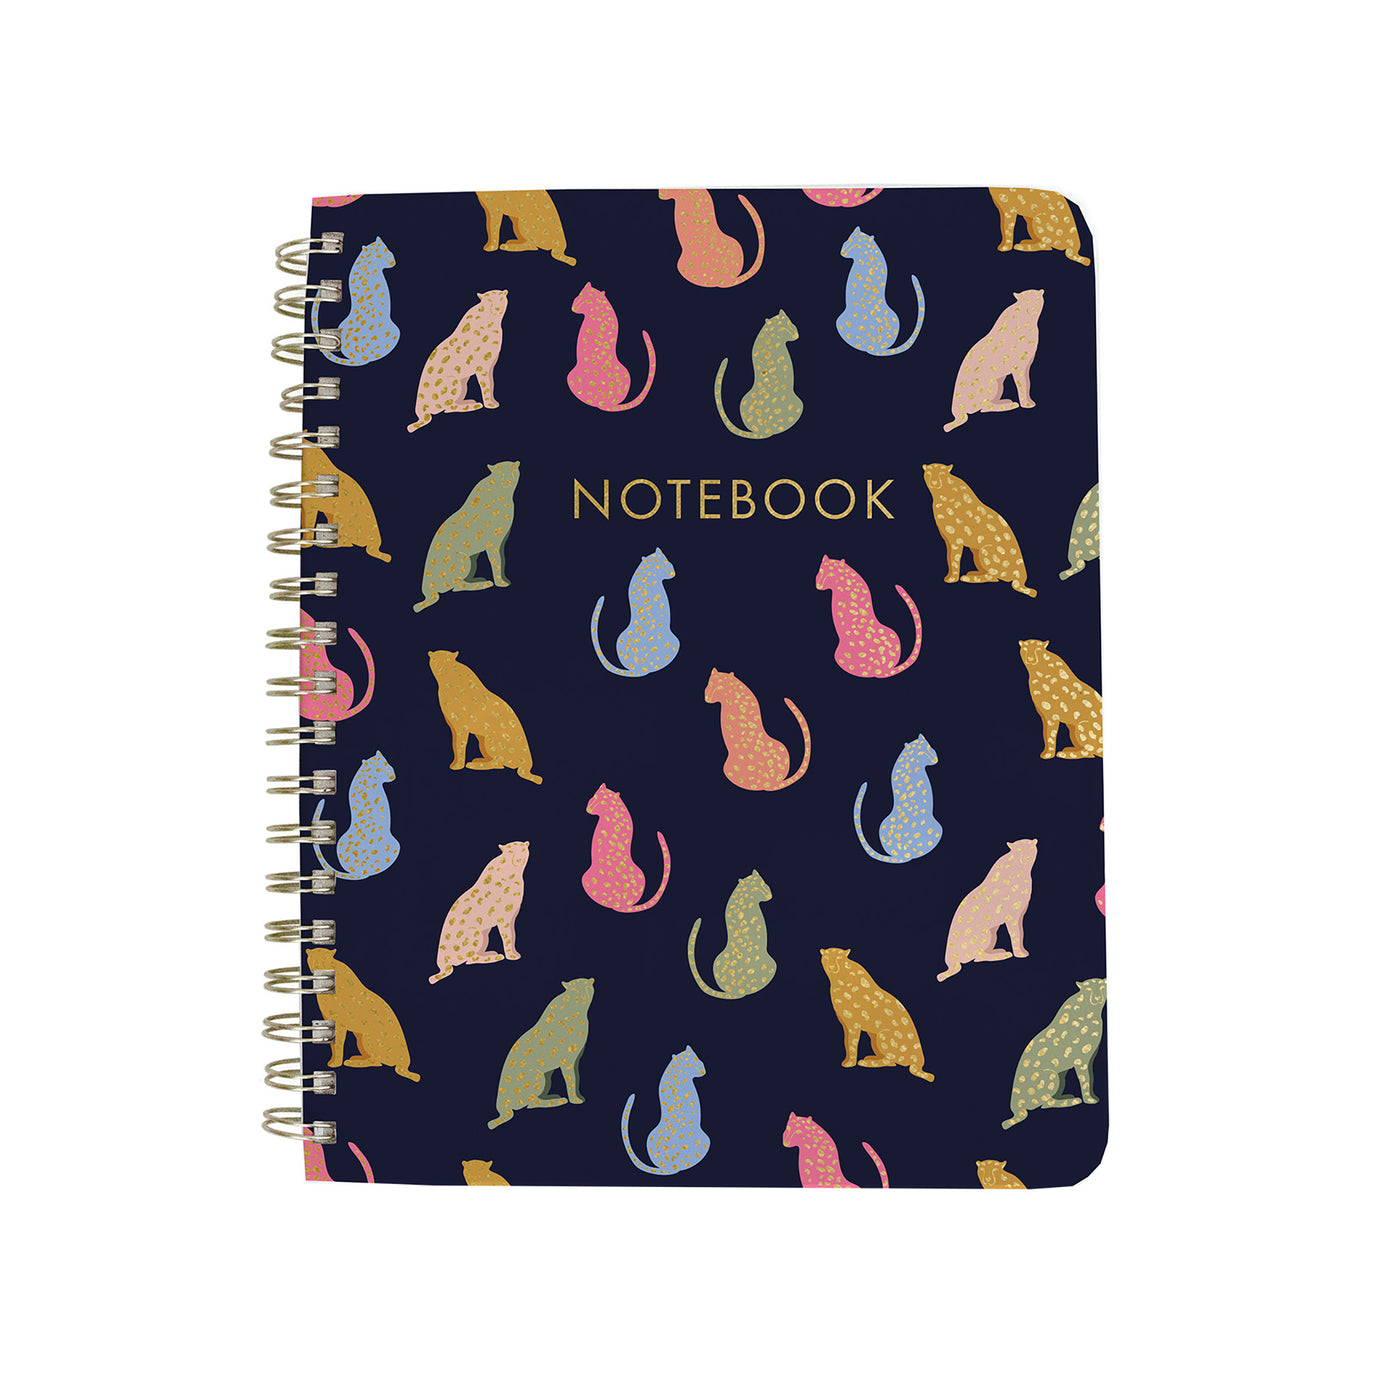 Leader of the Pack | Spiral Notebook - Mary Square, LLC